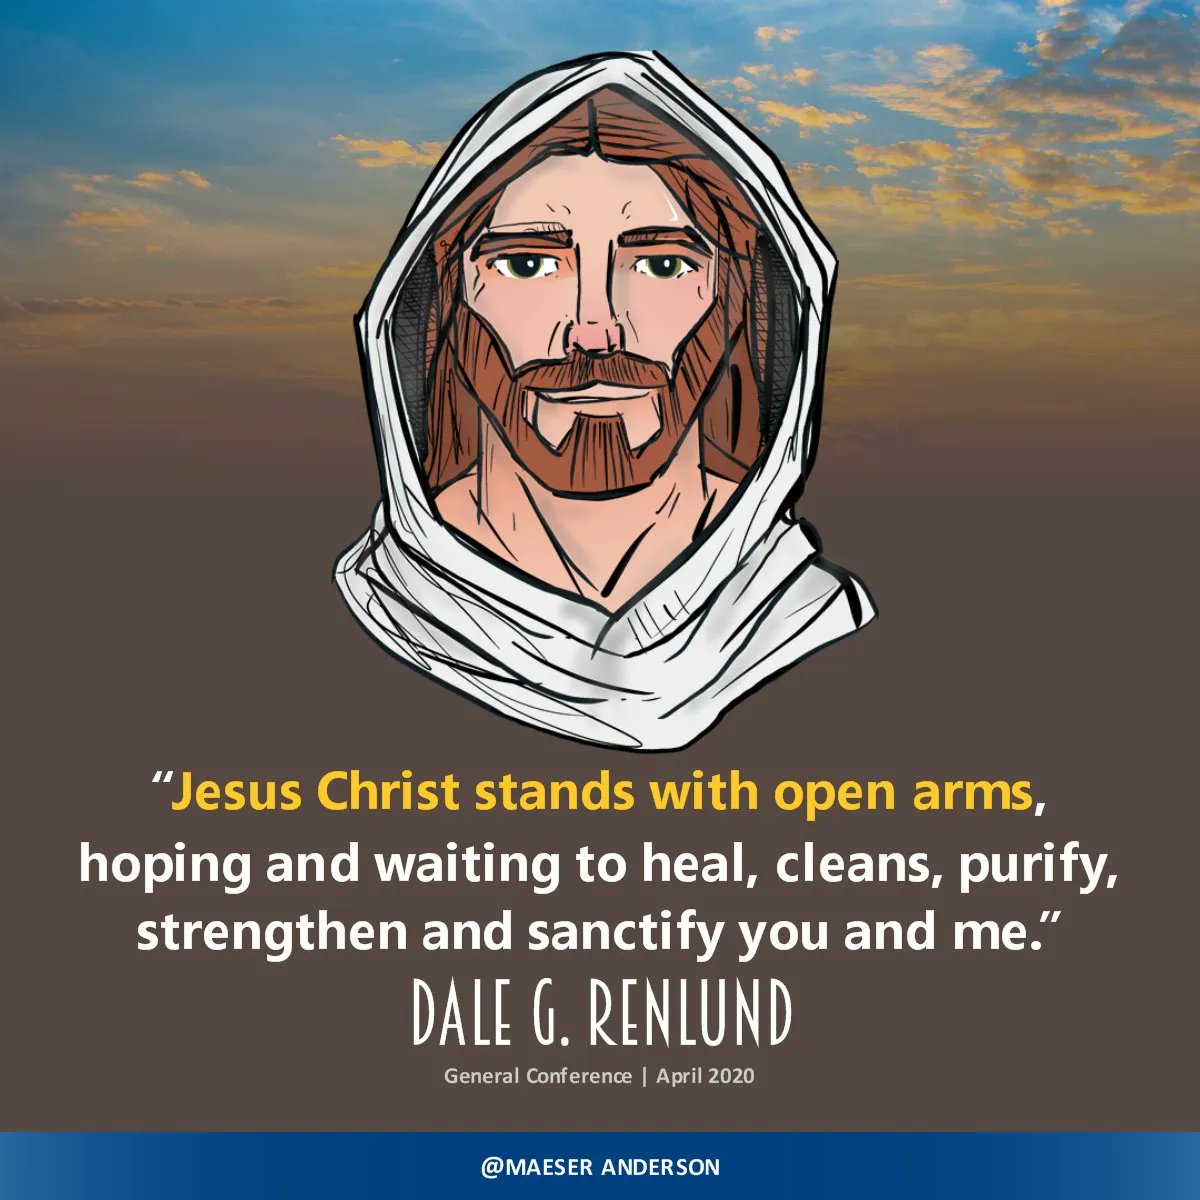 “Jesus Christ stands with open arms, hoping and waiting to heal, cleans, purify, strengthen and sanctify you and me.” - Dale G. Renlund

SOURCE: General Conference | April 2020 
———
#generalconference #HearHim #JesusChrist #sharegoodness #ComeFollowMe #strivetobe #quotestoliveby https://t.co/44lLHKZGK4